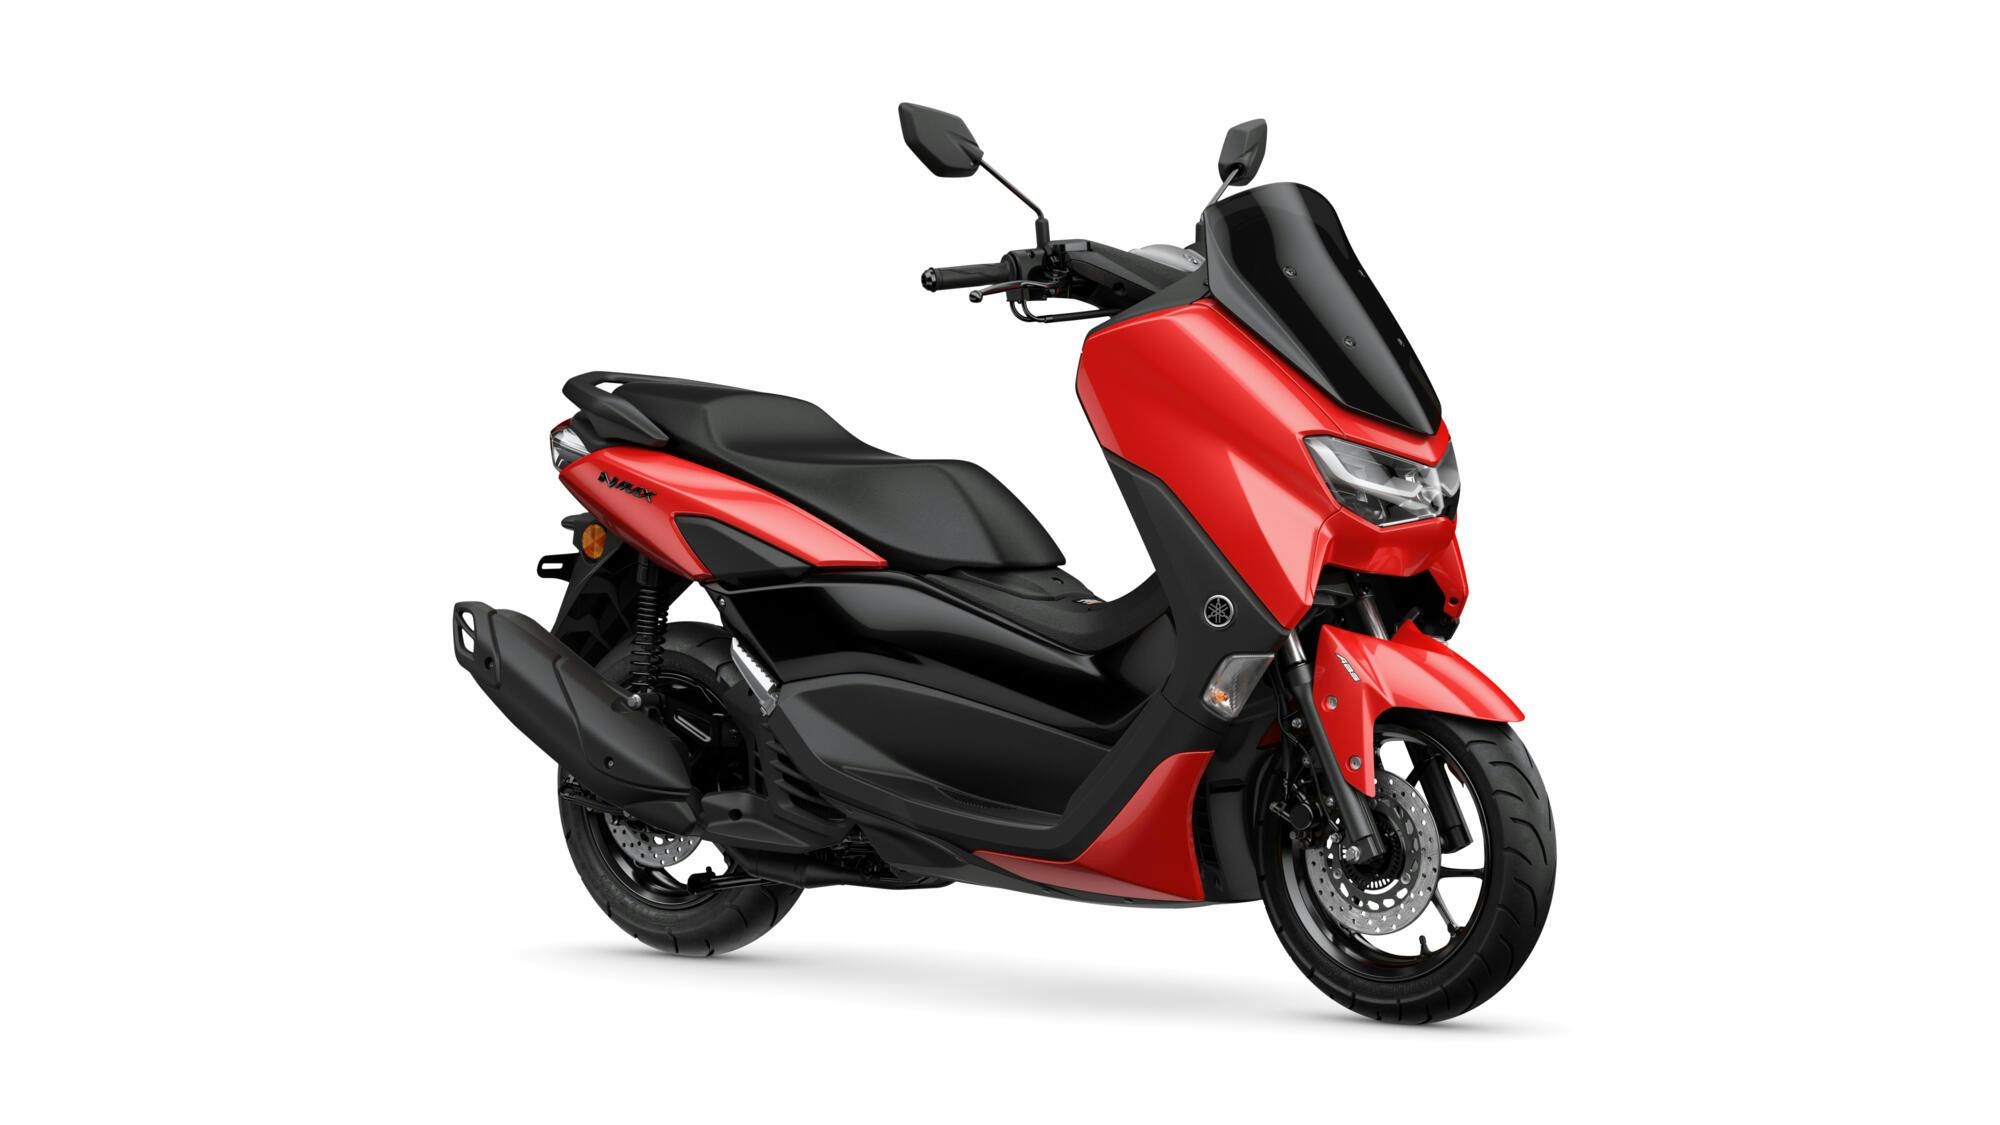  NMAX 155 RUBY RED